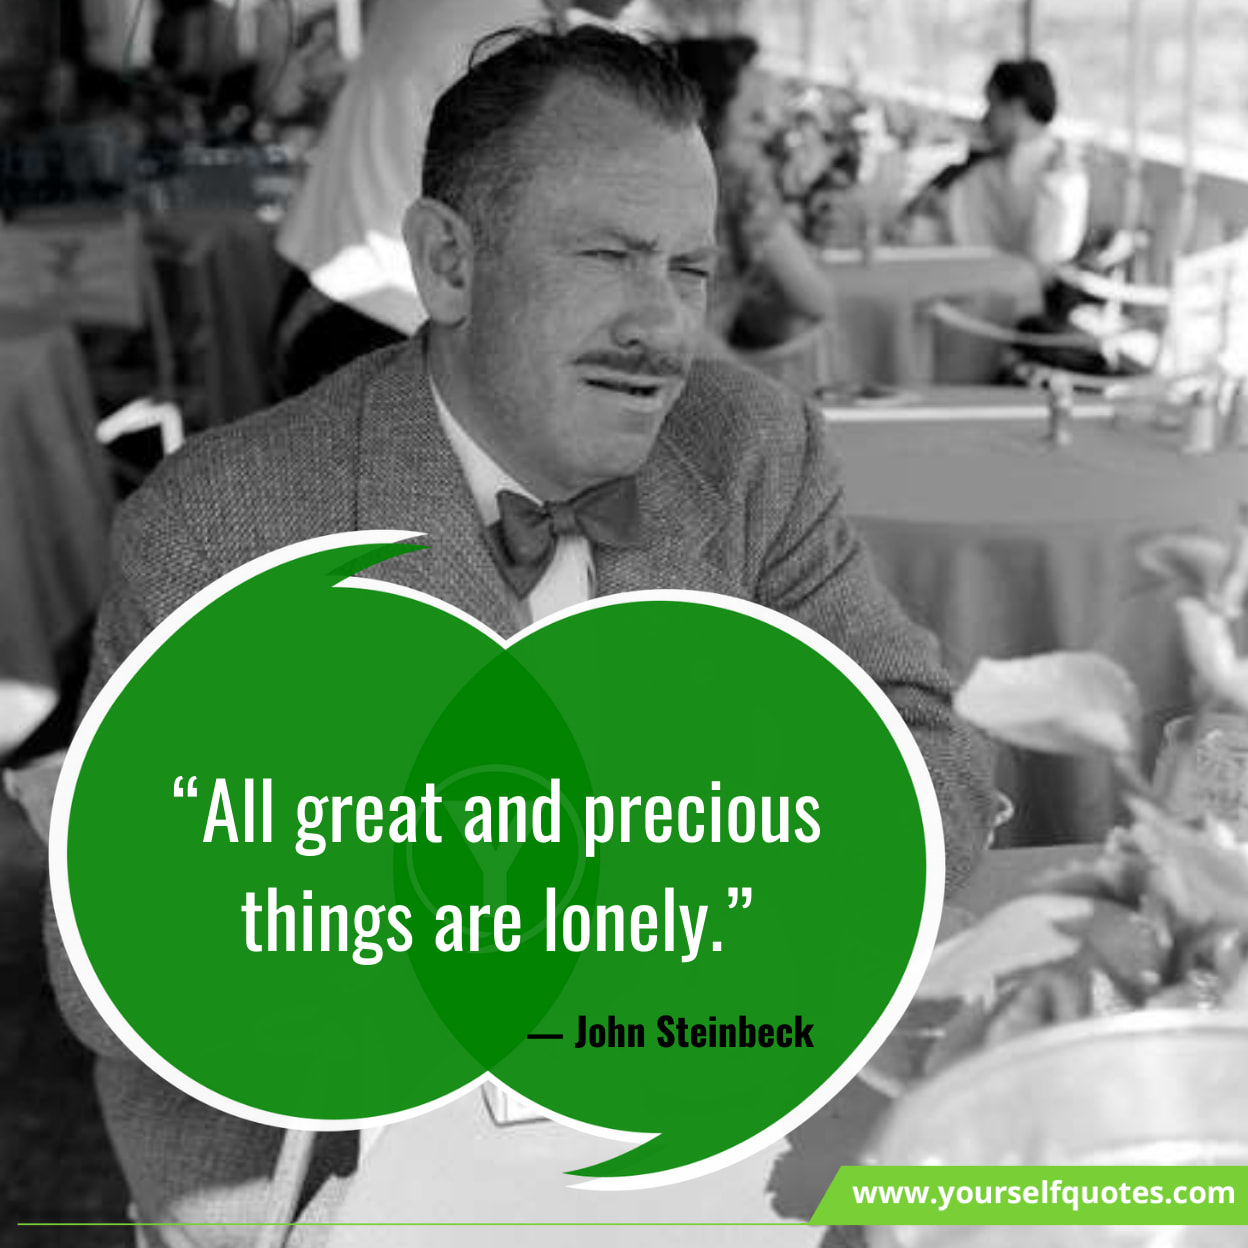 Best Loneliness Quotes for Being Lonely